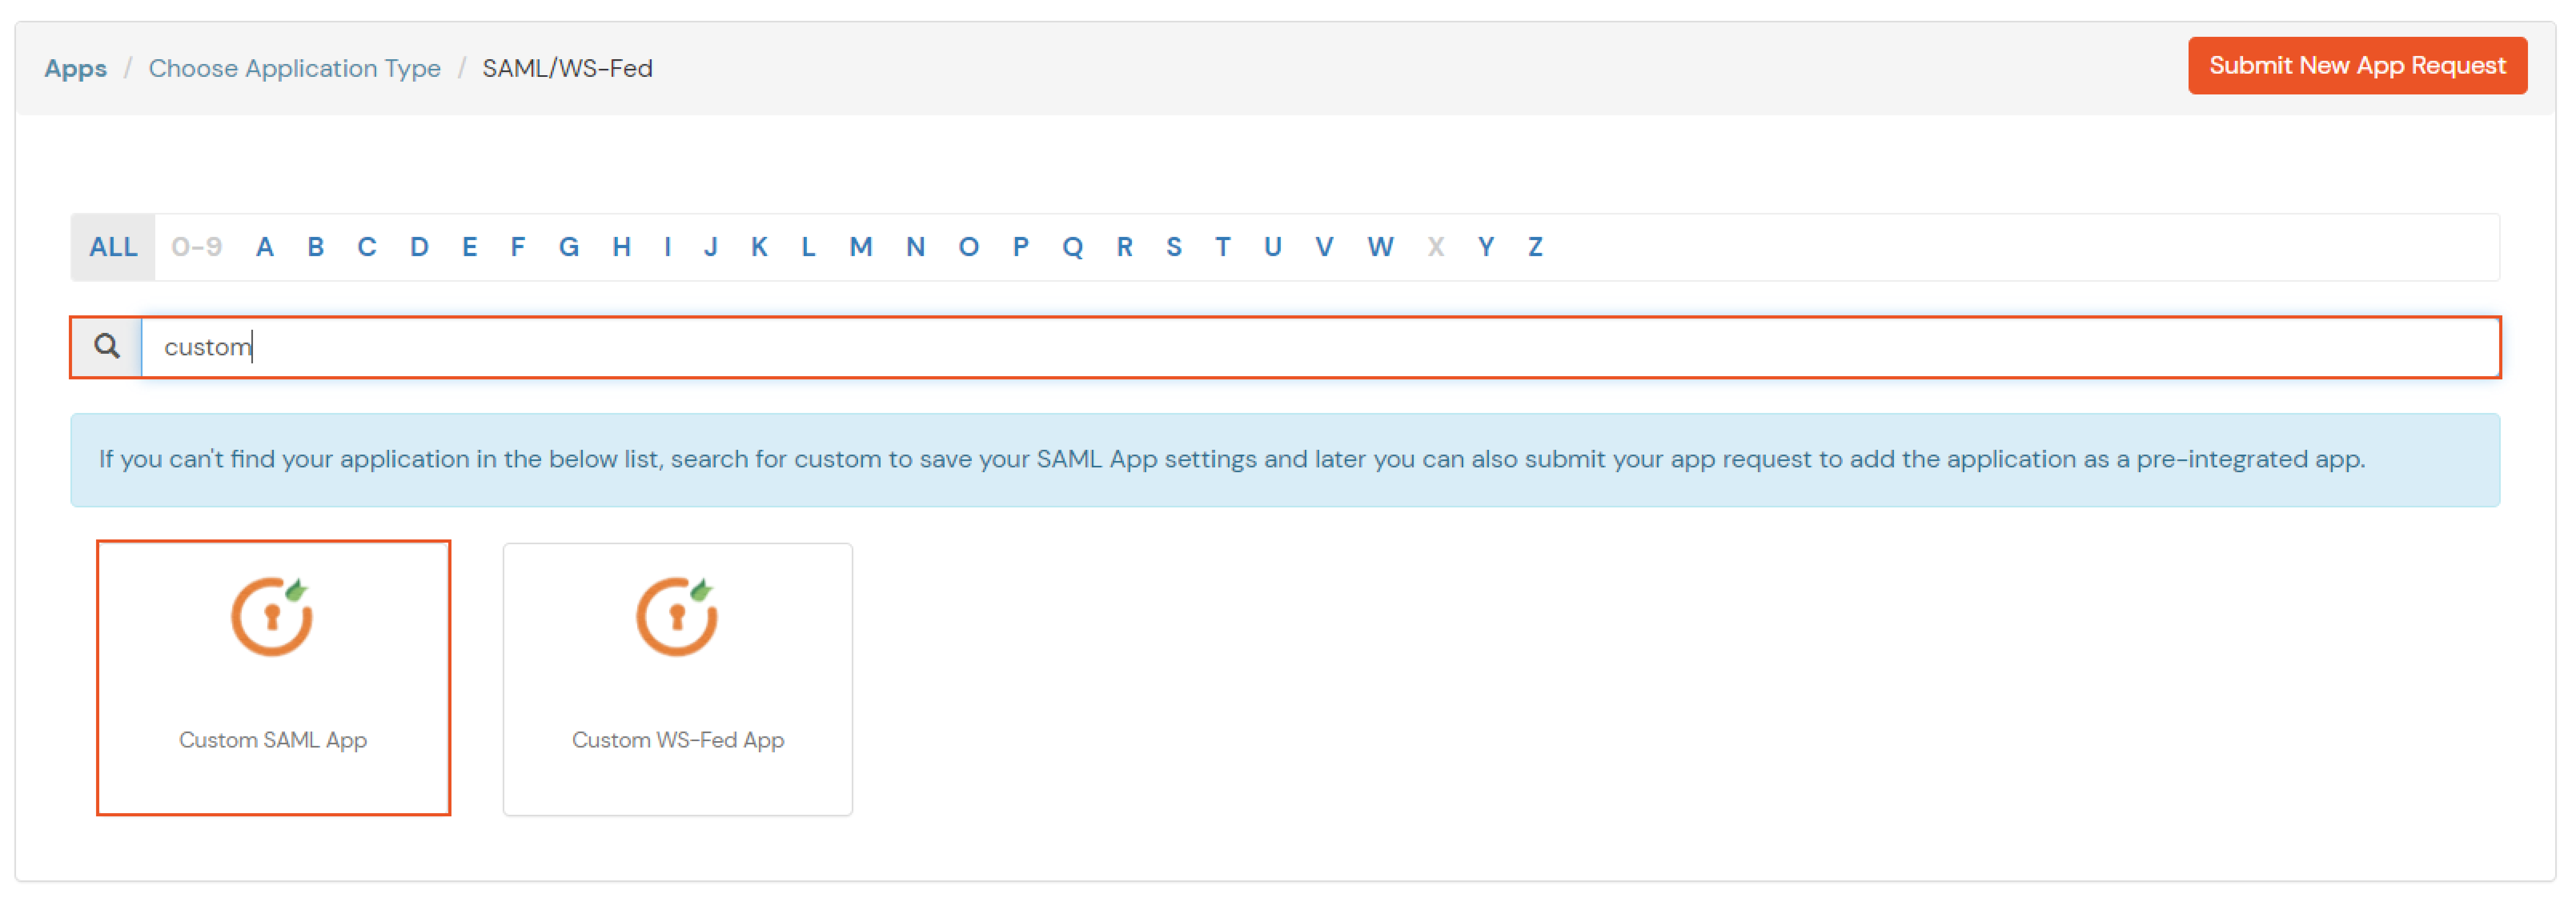 Search for your SAML App